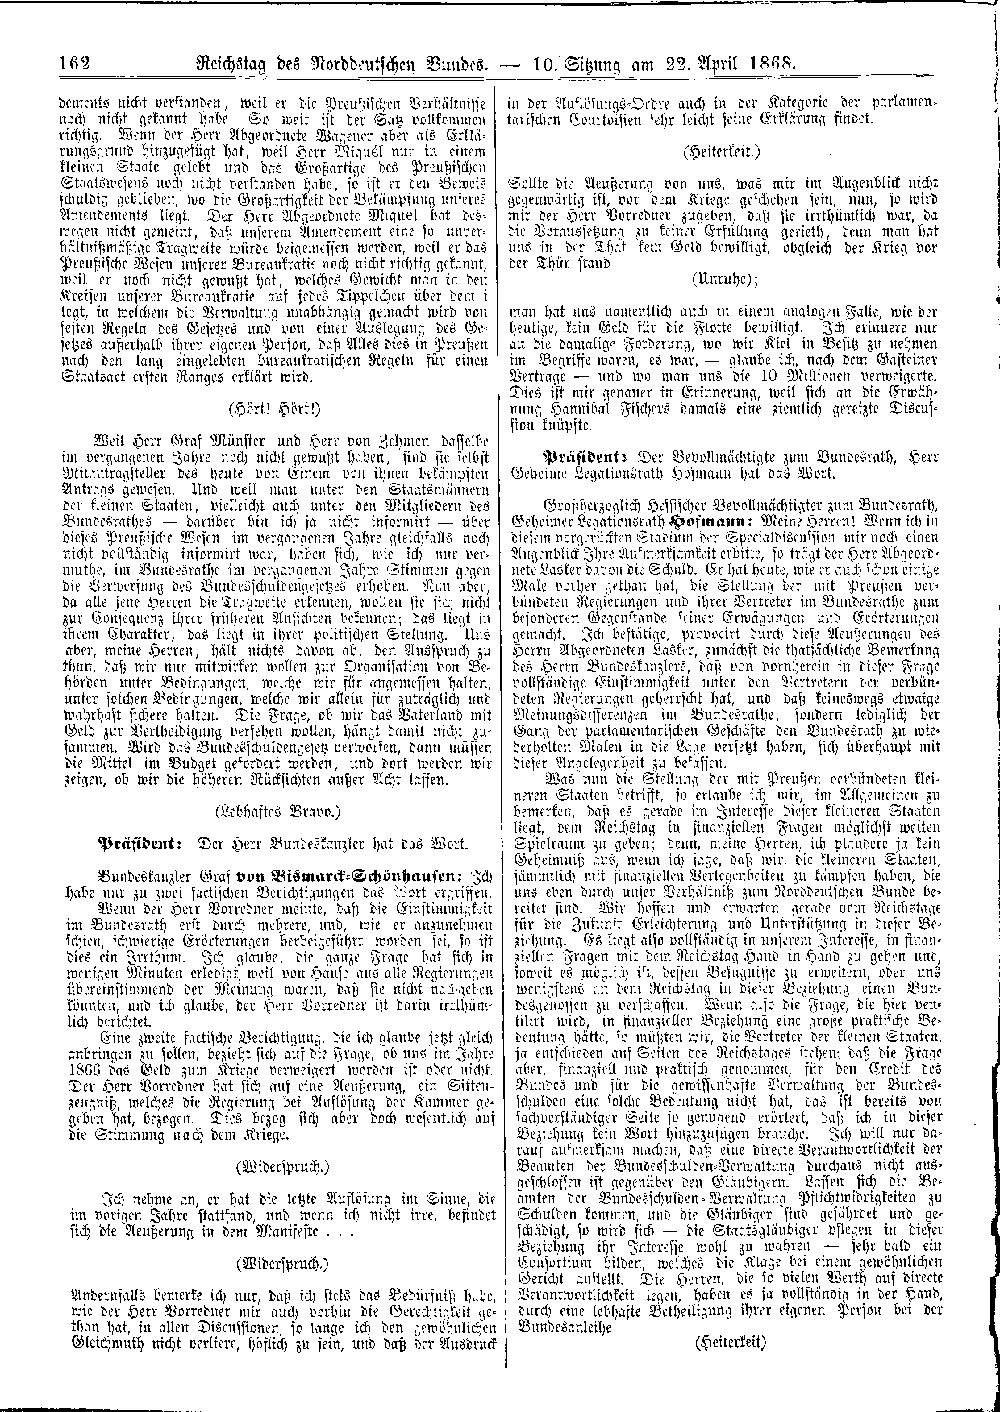 Scan of page 162